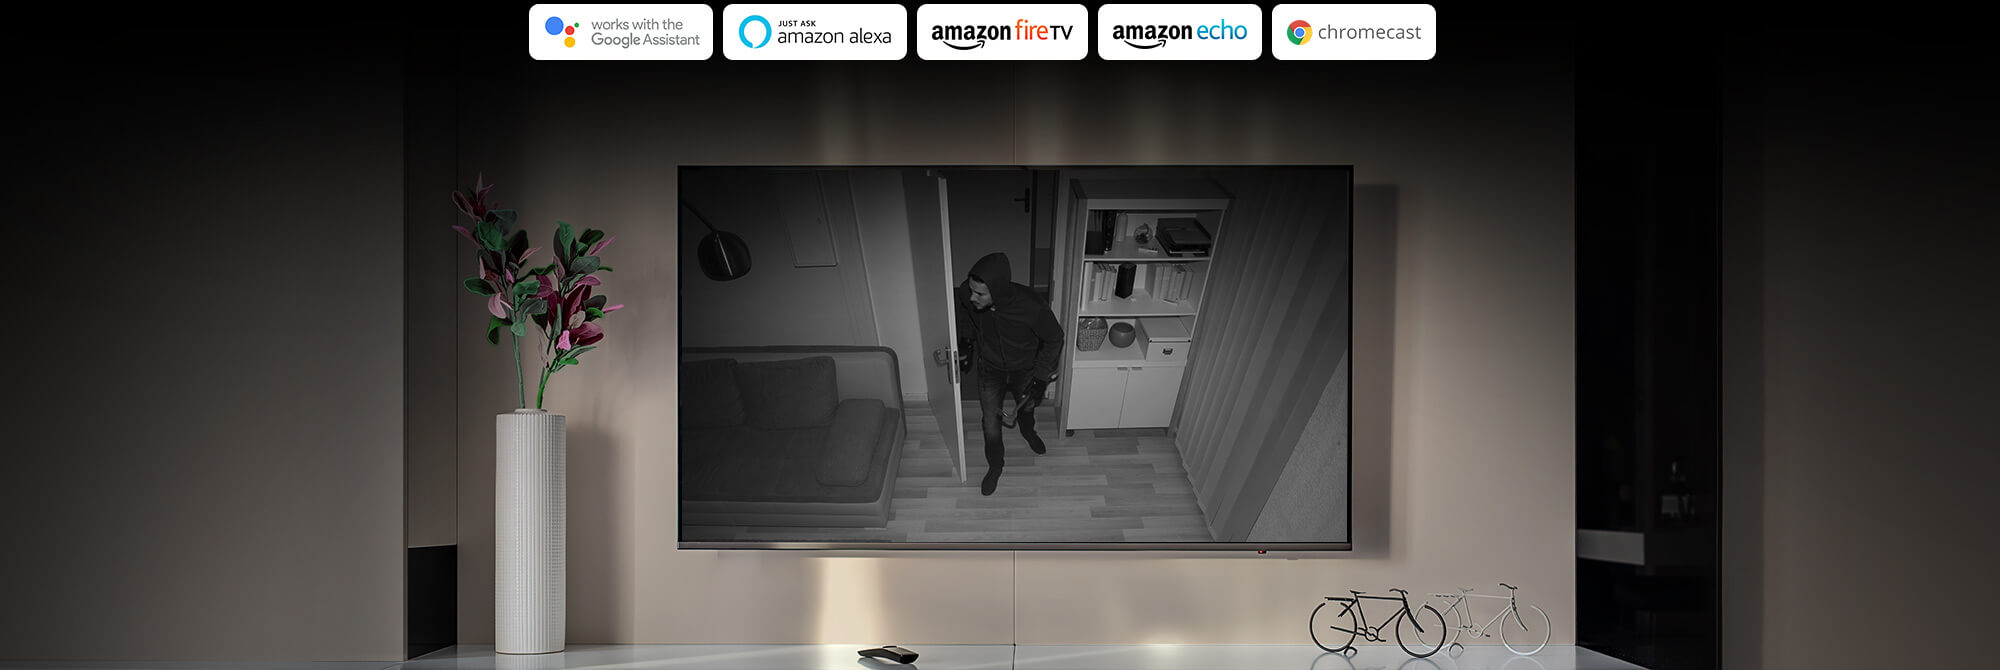 Stream your home video feed on your TV with voice control